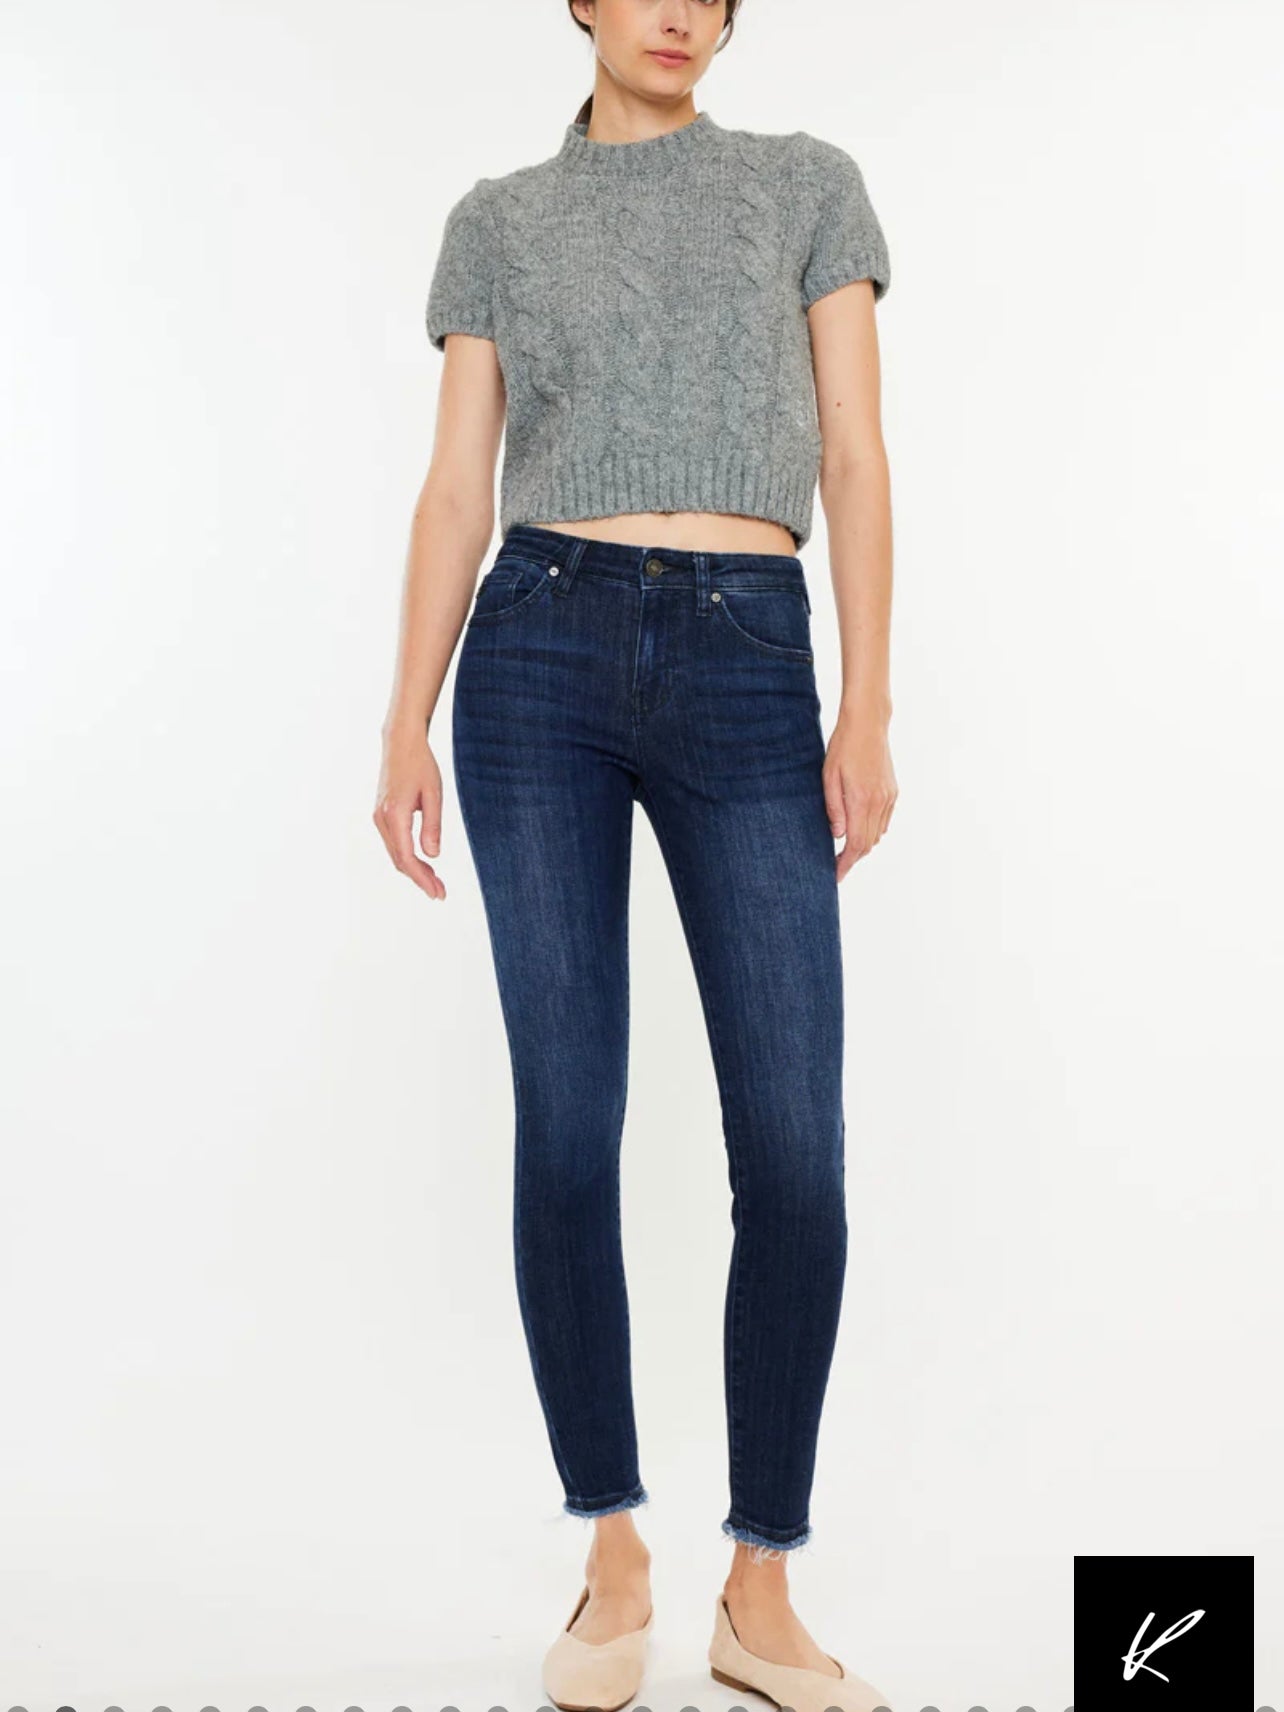 The Atlanna Mid Rise Ankle Skinny Jeans